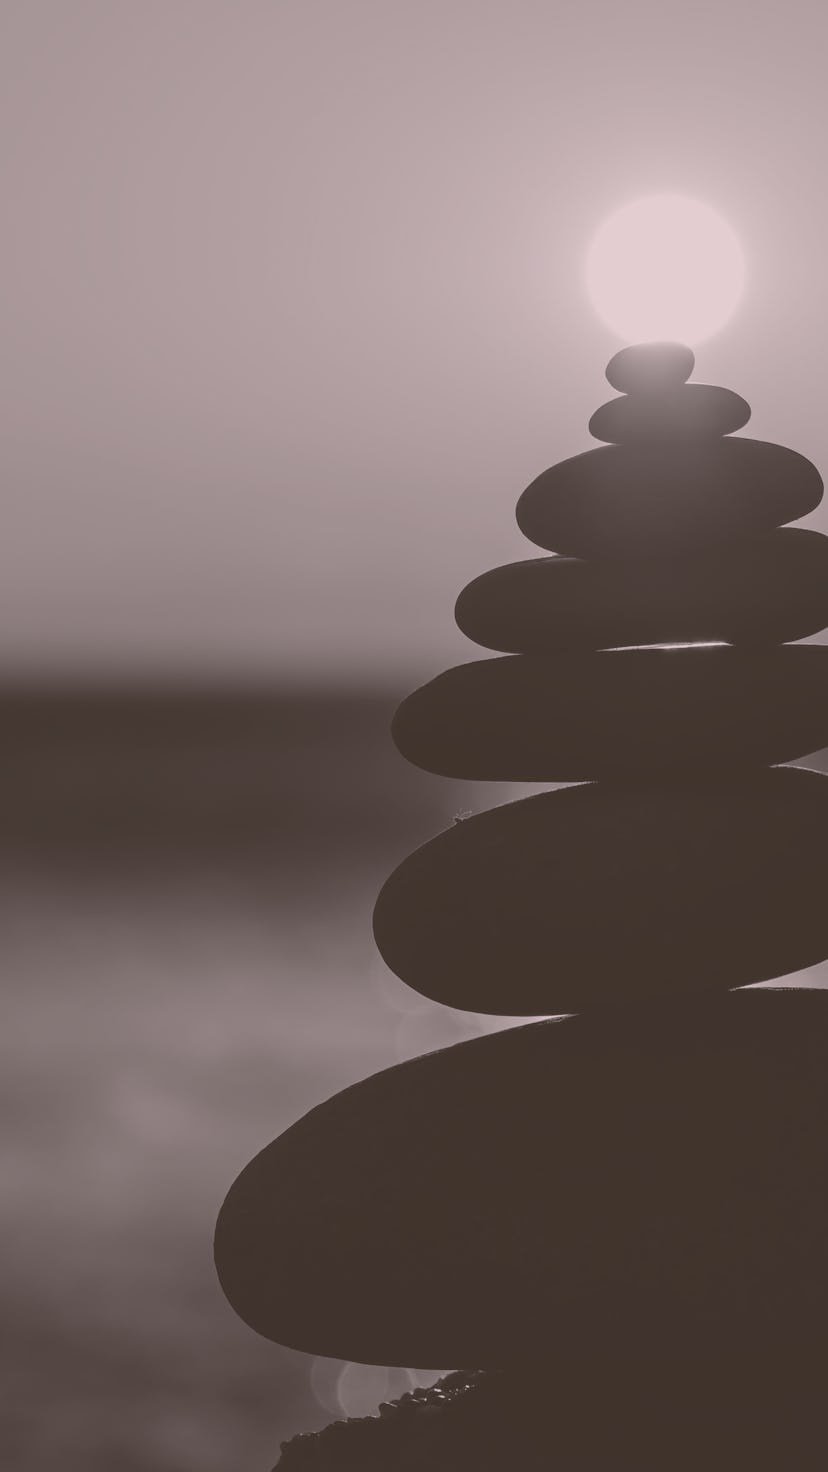 Balanced pebble pyramid silhouette on the beach with the sunset in the background